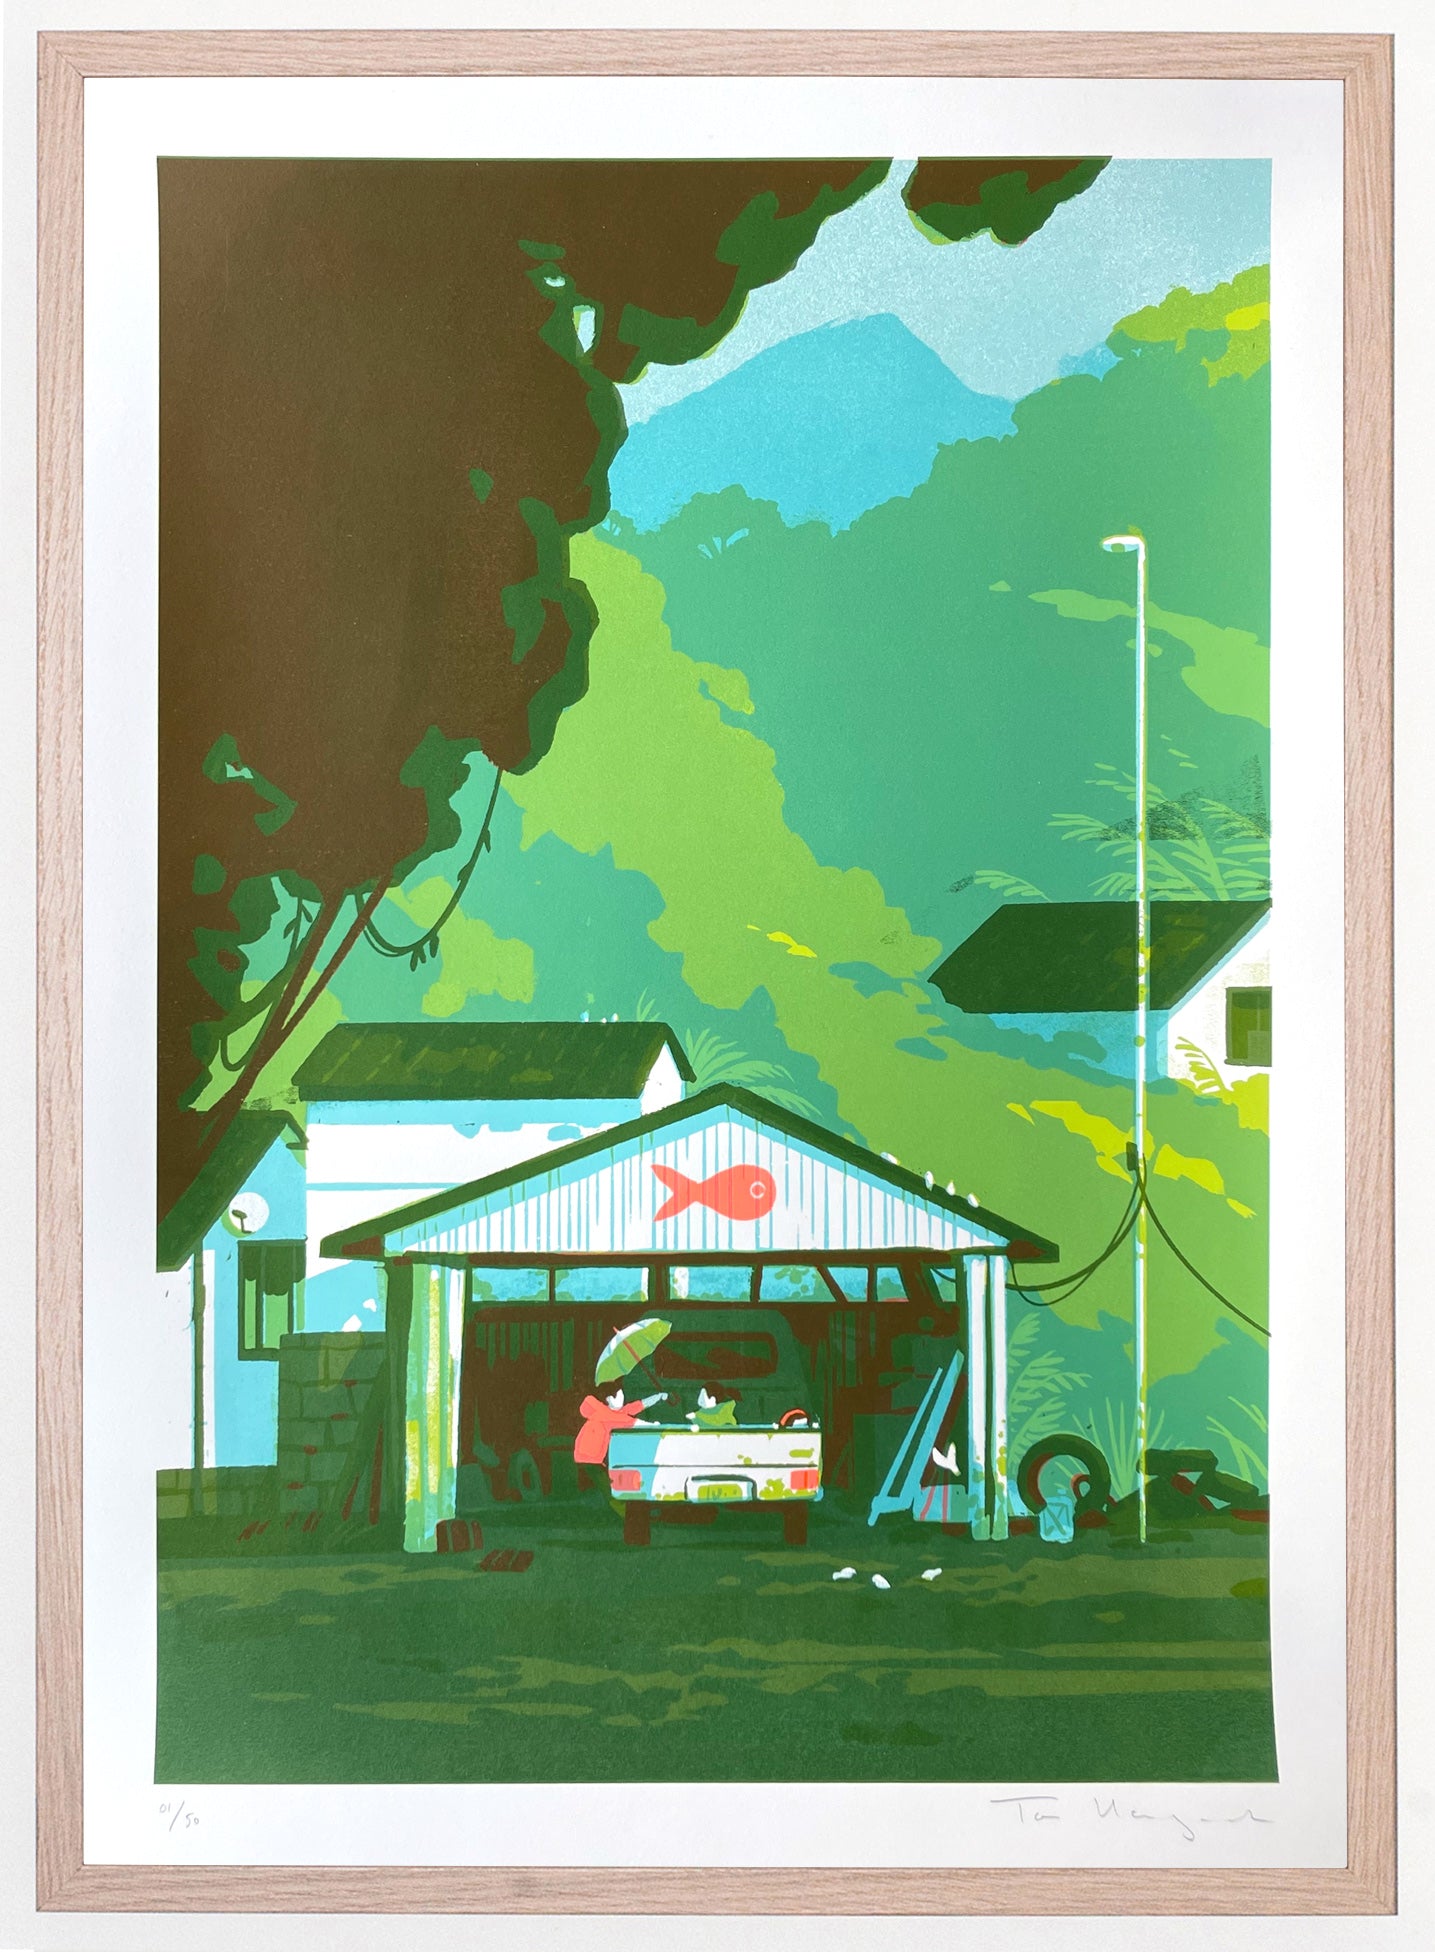 Limited edition print by Tom Haugomat for The Jaunt